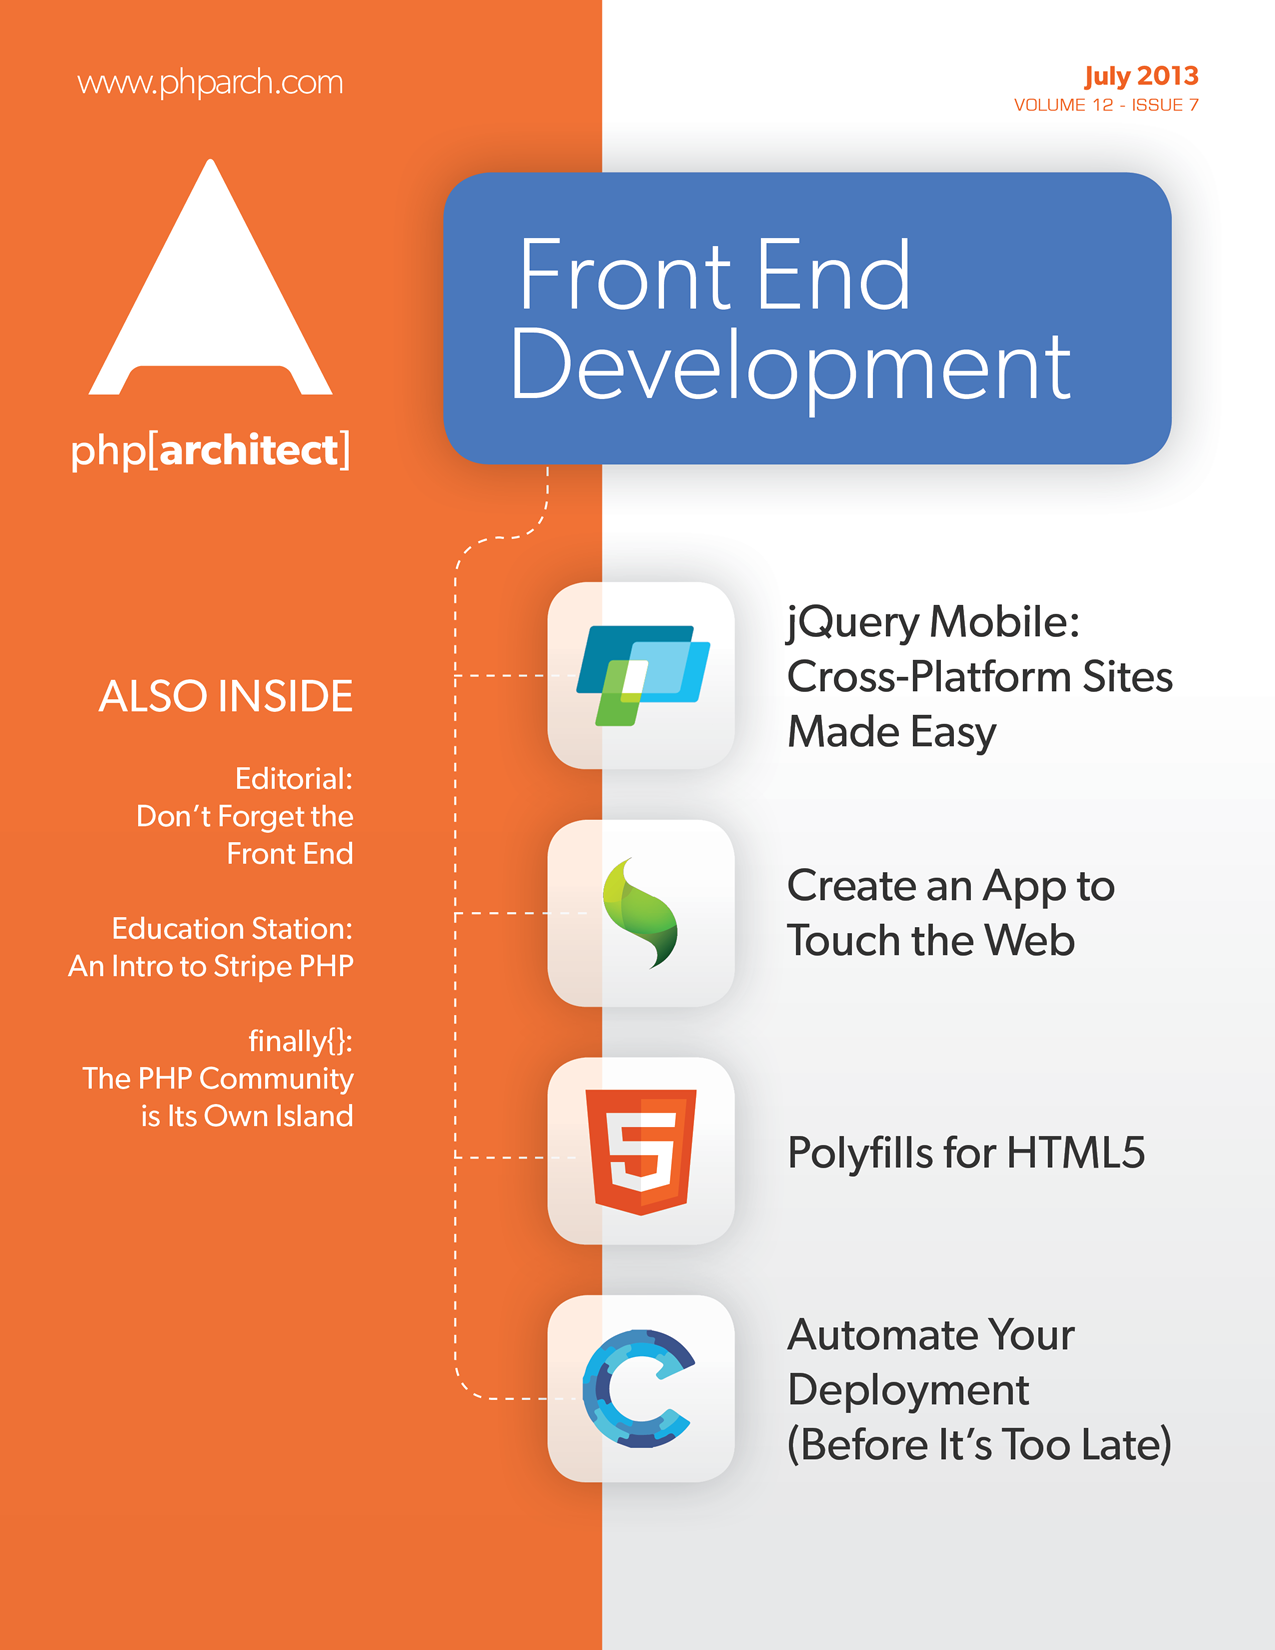 php|architect July 2013 - Front End Development